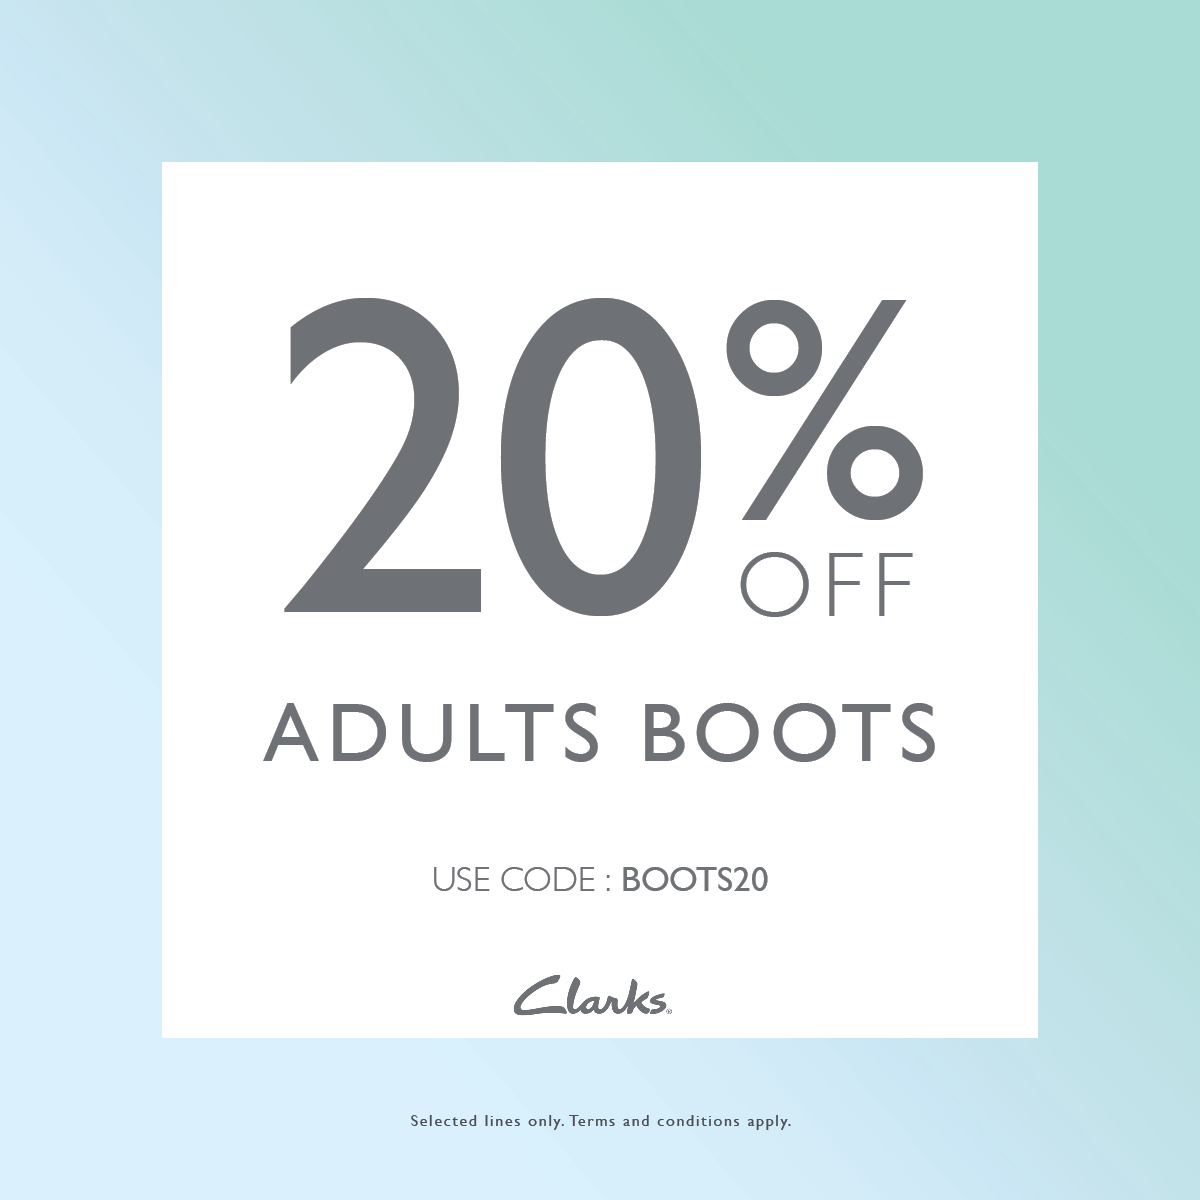 clarks 20 off adults